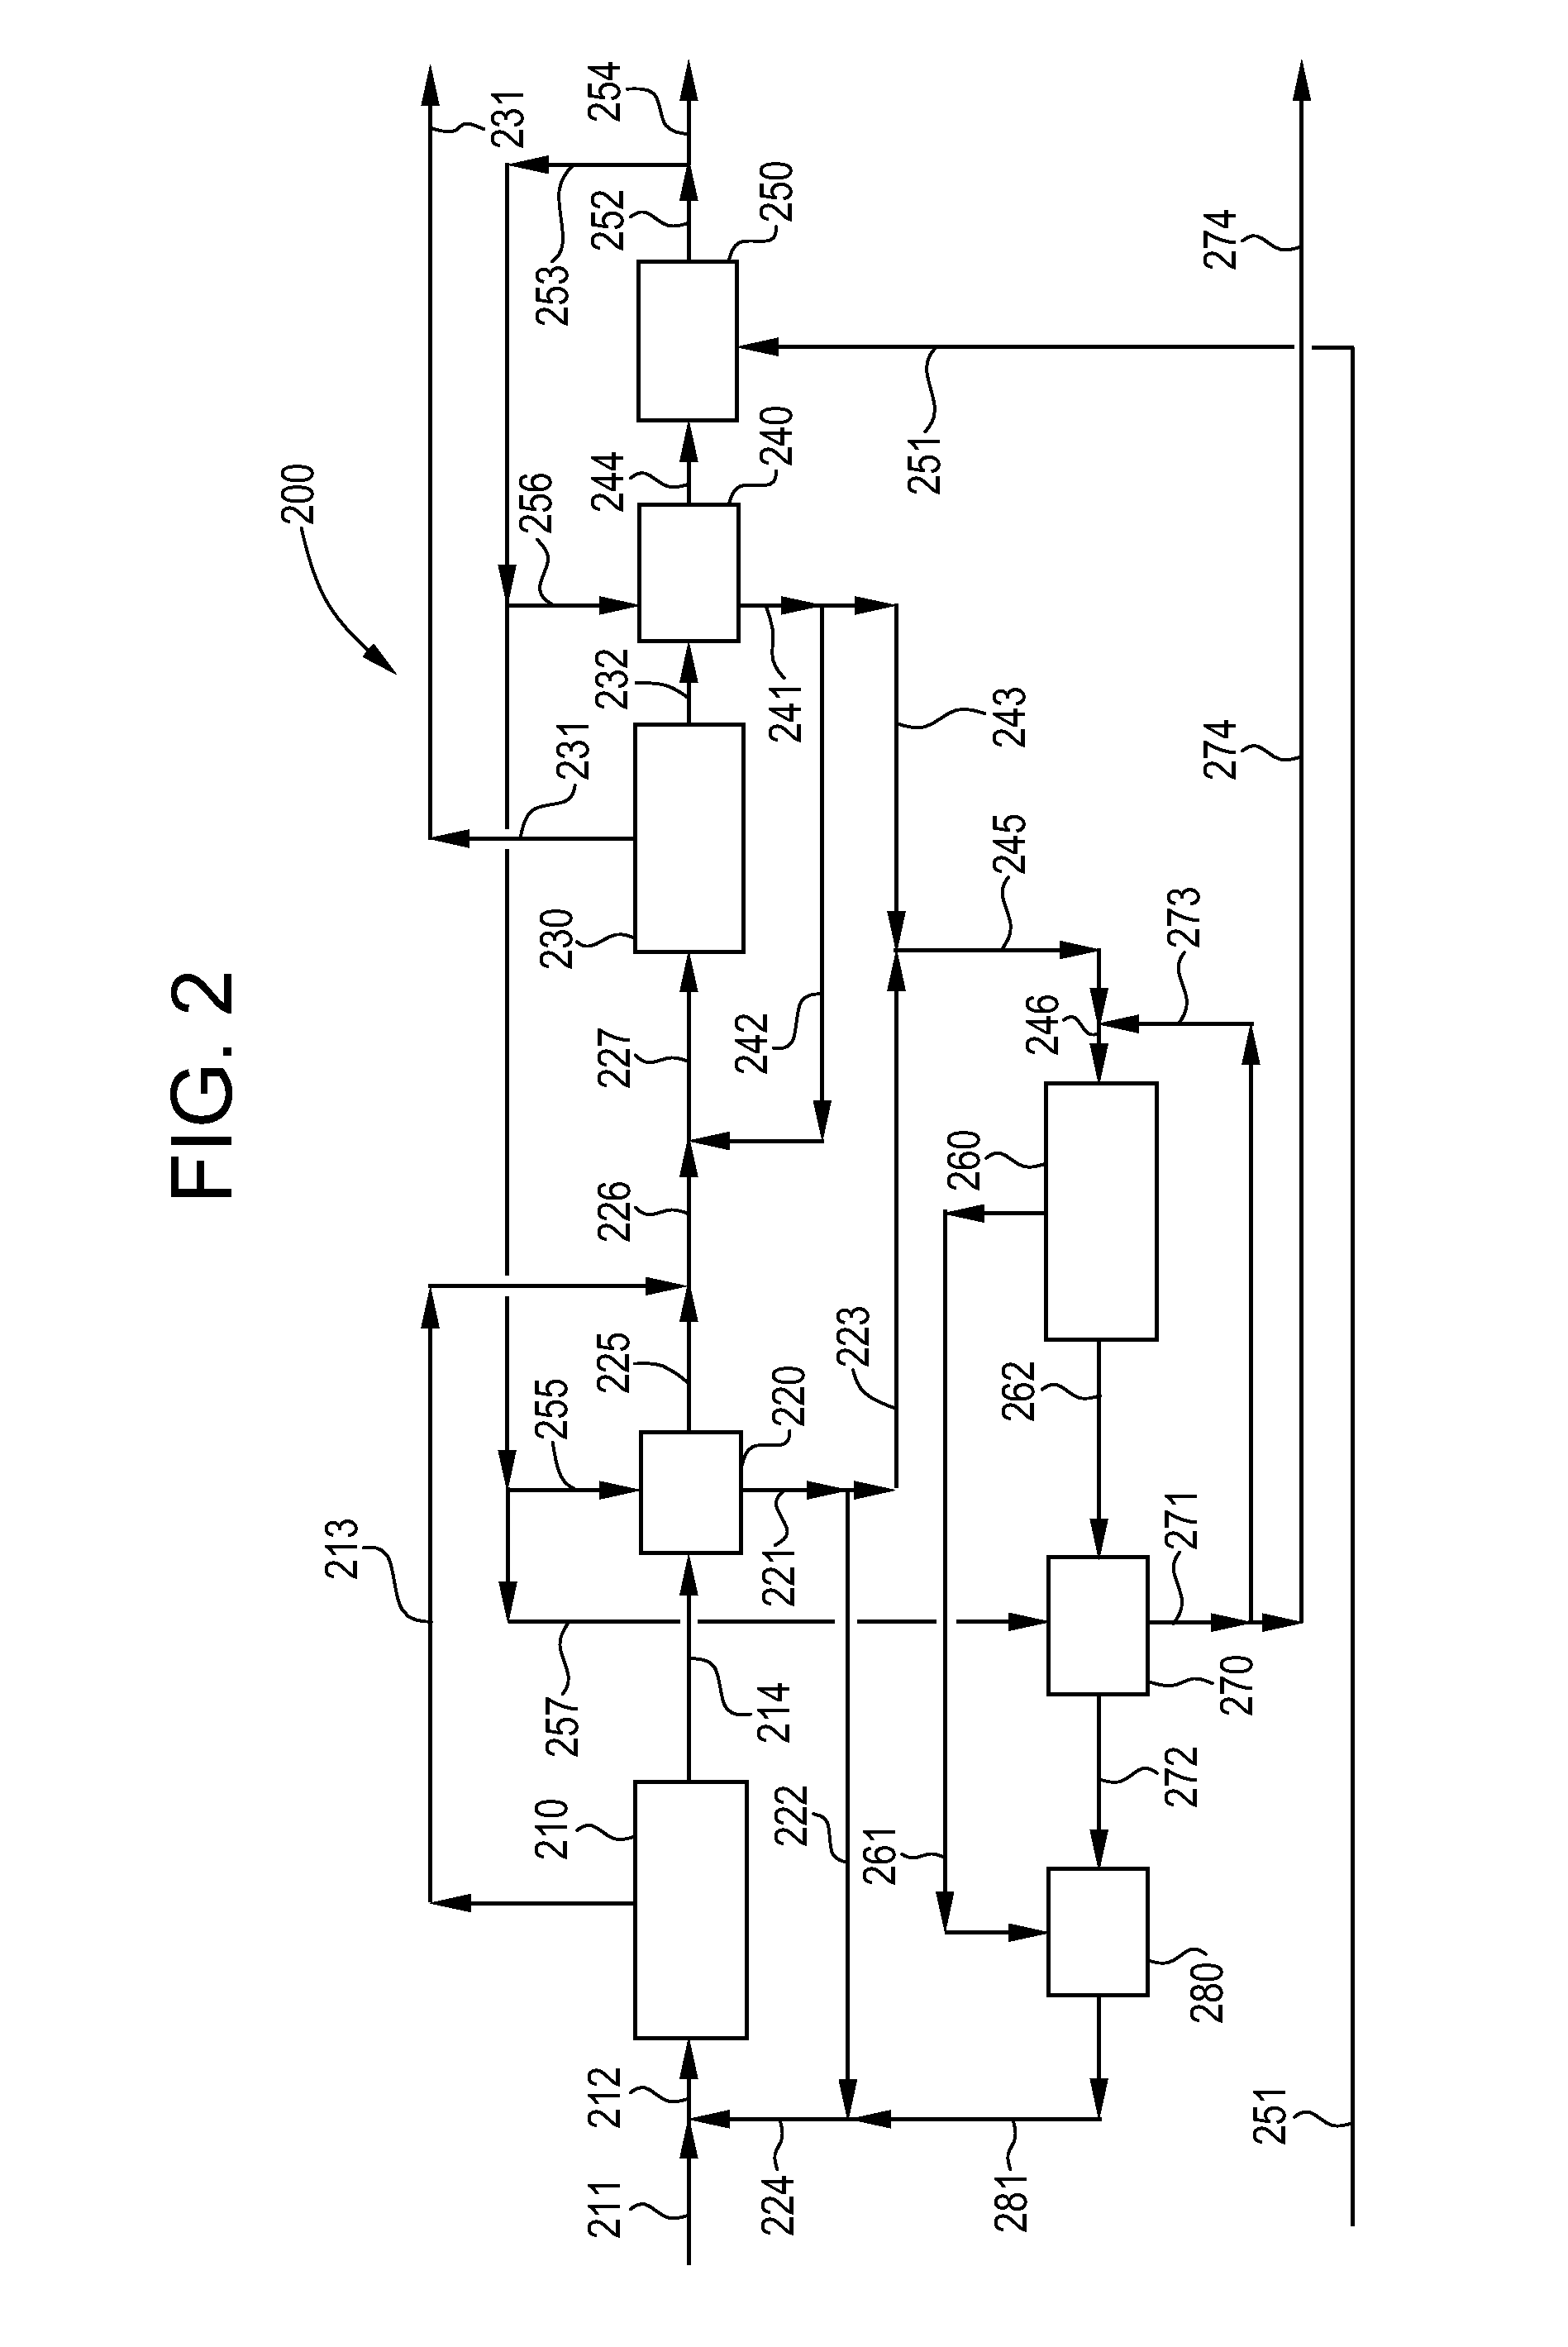 Process and apparatus for purification of industrial brine